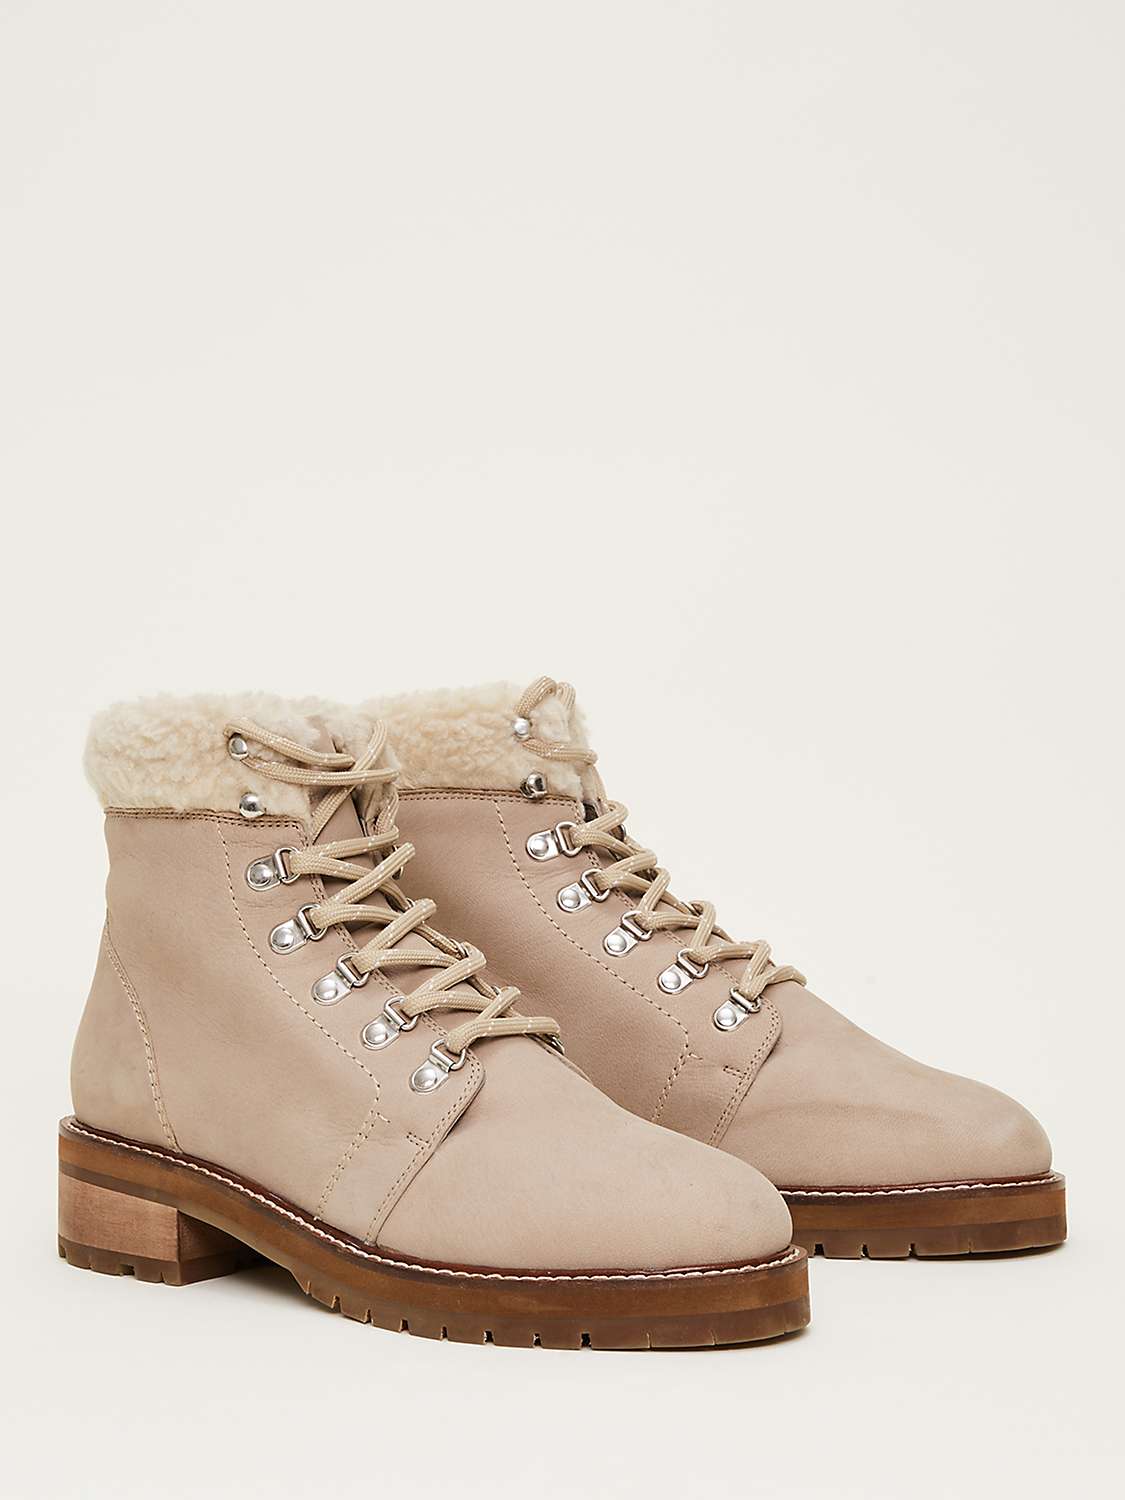 Buy Phase Eight Borg Trim Hiker Boots, Stone Online at johnlewis.com